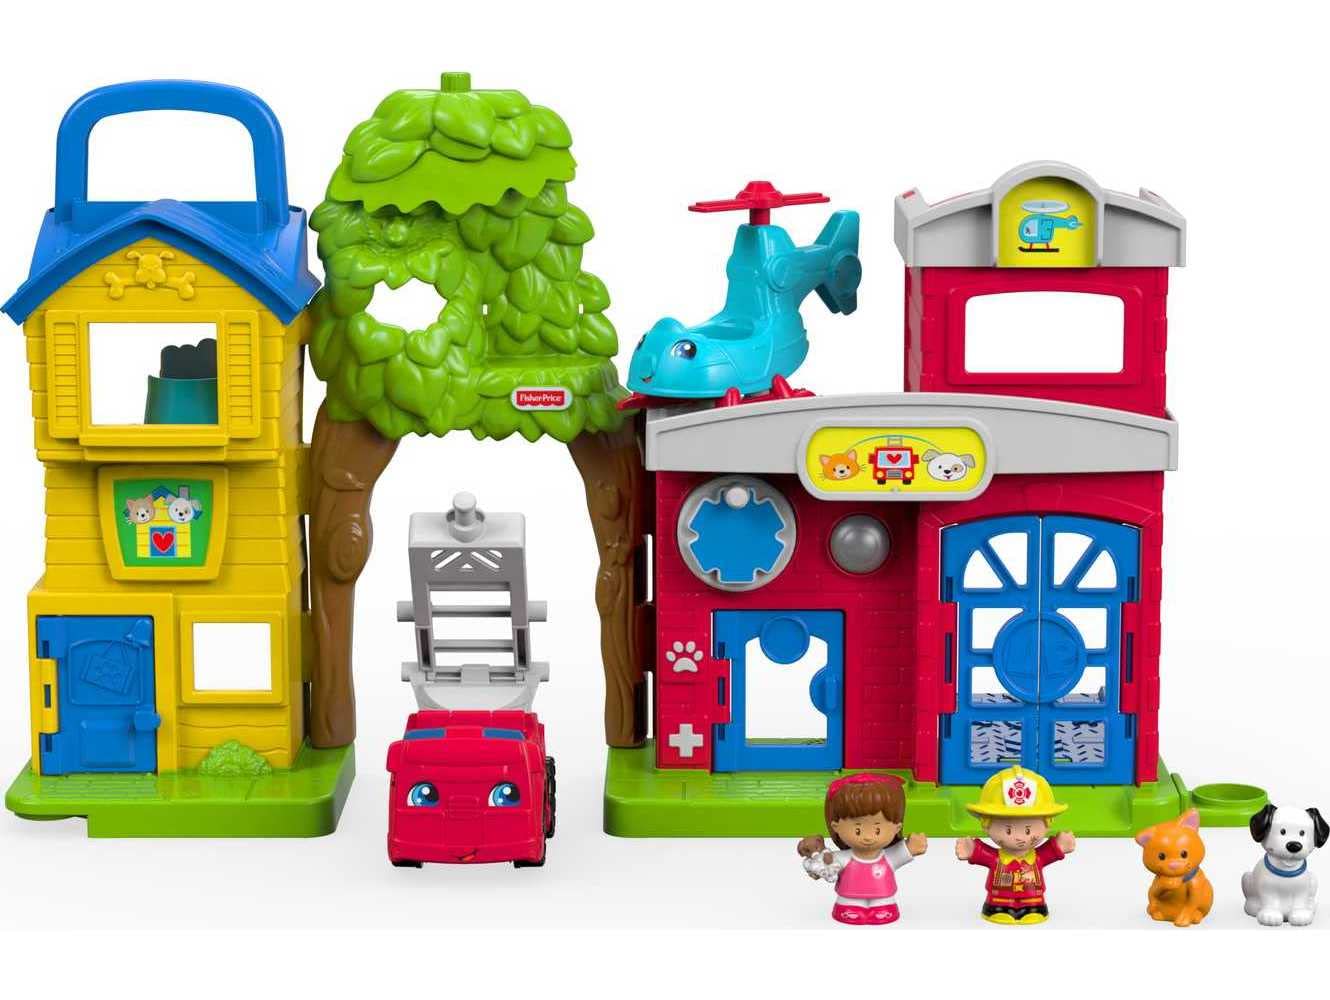 Fisher-Price Little People Toddler Toy Animal Rescue Playset with Lights Sounds Figures & Vehicles for Ages 1+ Years (Amazon Exclusive)